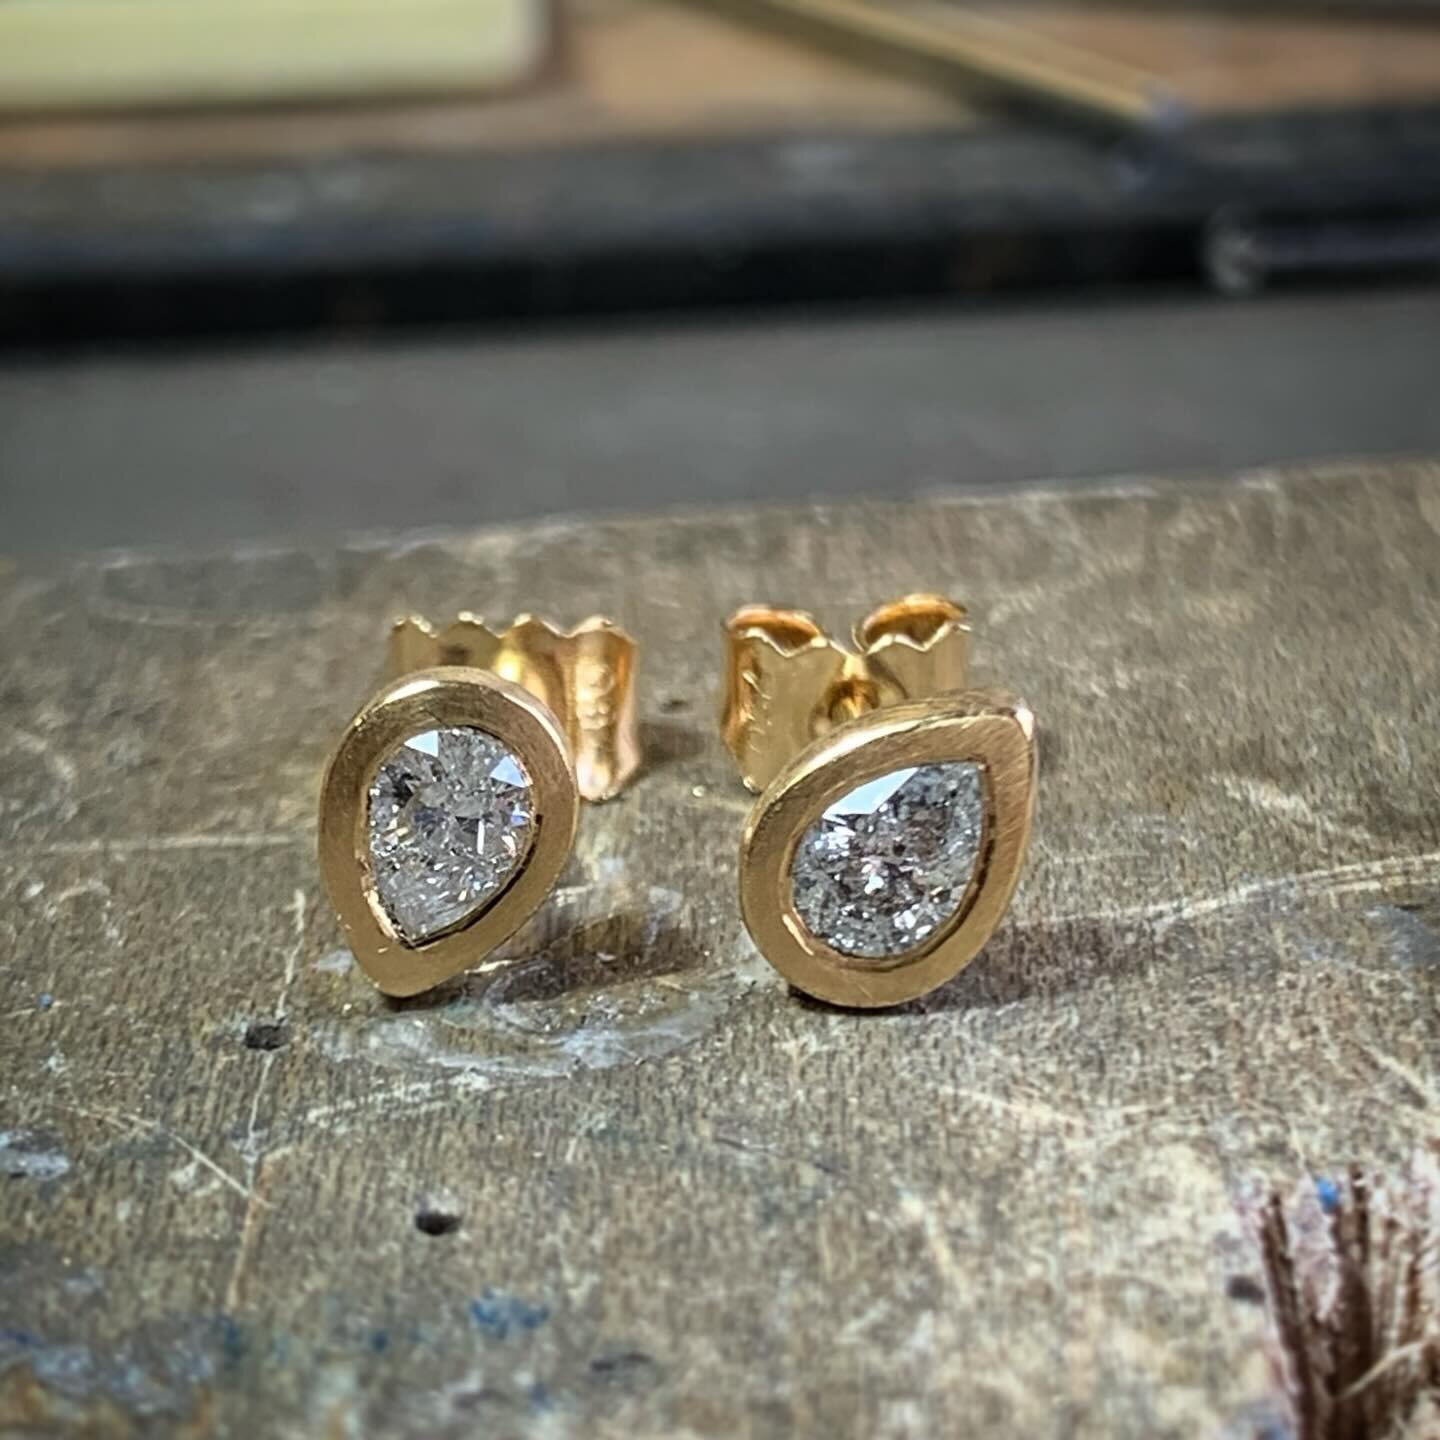 Some Friday ✨✨✨ for you, a couple of diamonds commissions as extra special presents. Wherever you wear them diamonds will light up your life ❤️
If you would like to commission something sparkly for yourself or a loved one DM me or contact me through 